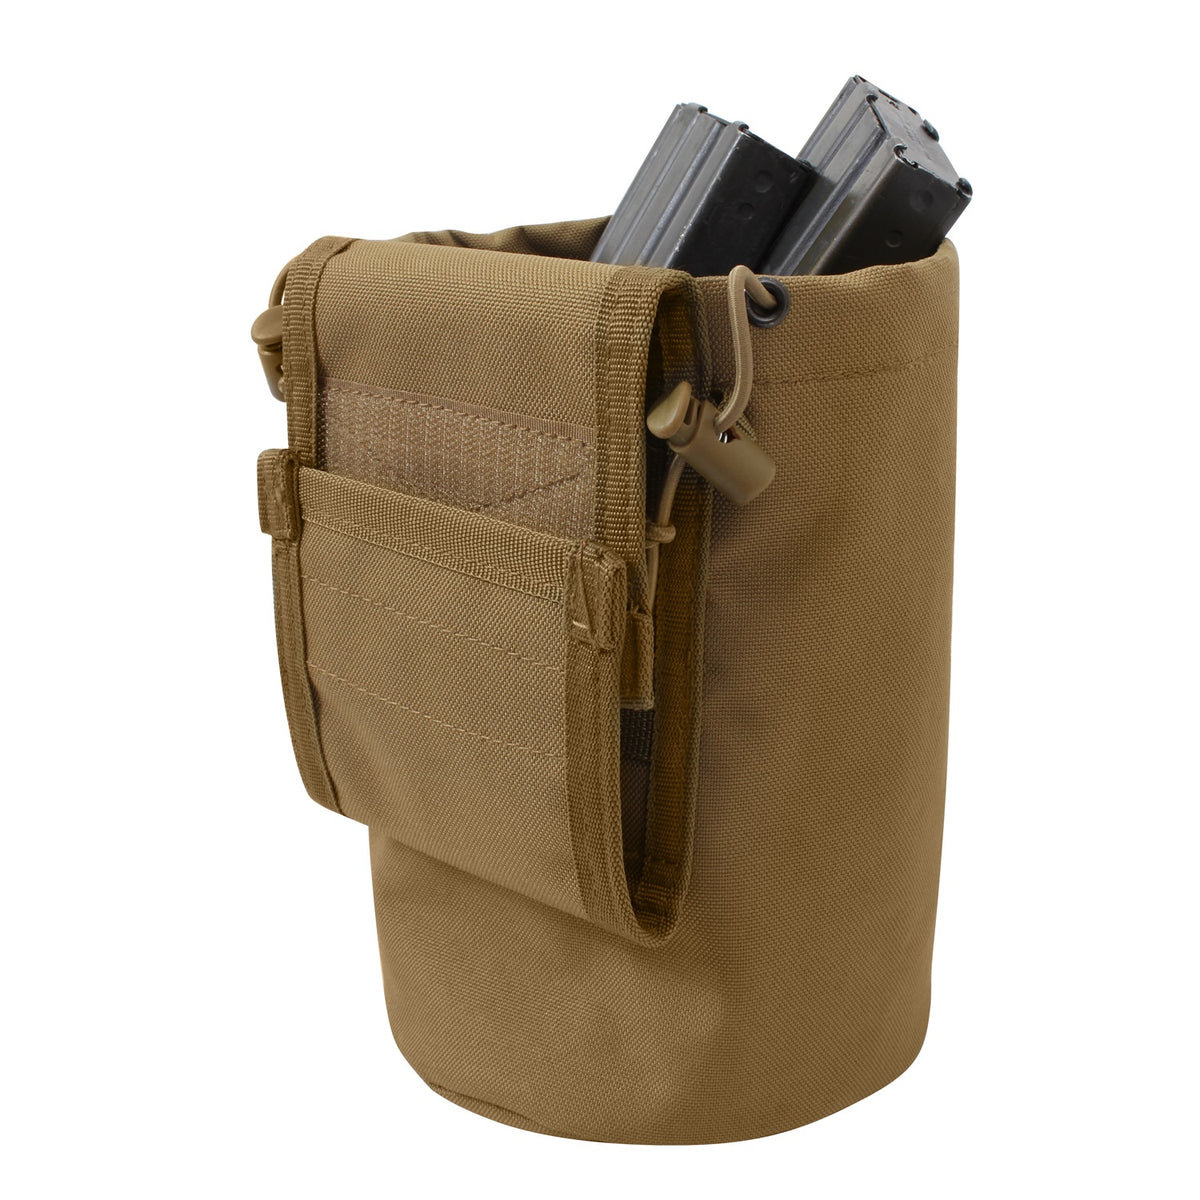 Rothco MOLLE Roll-Up Utility Dump Pouch Coyote Brown